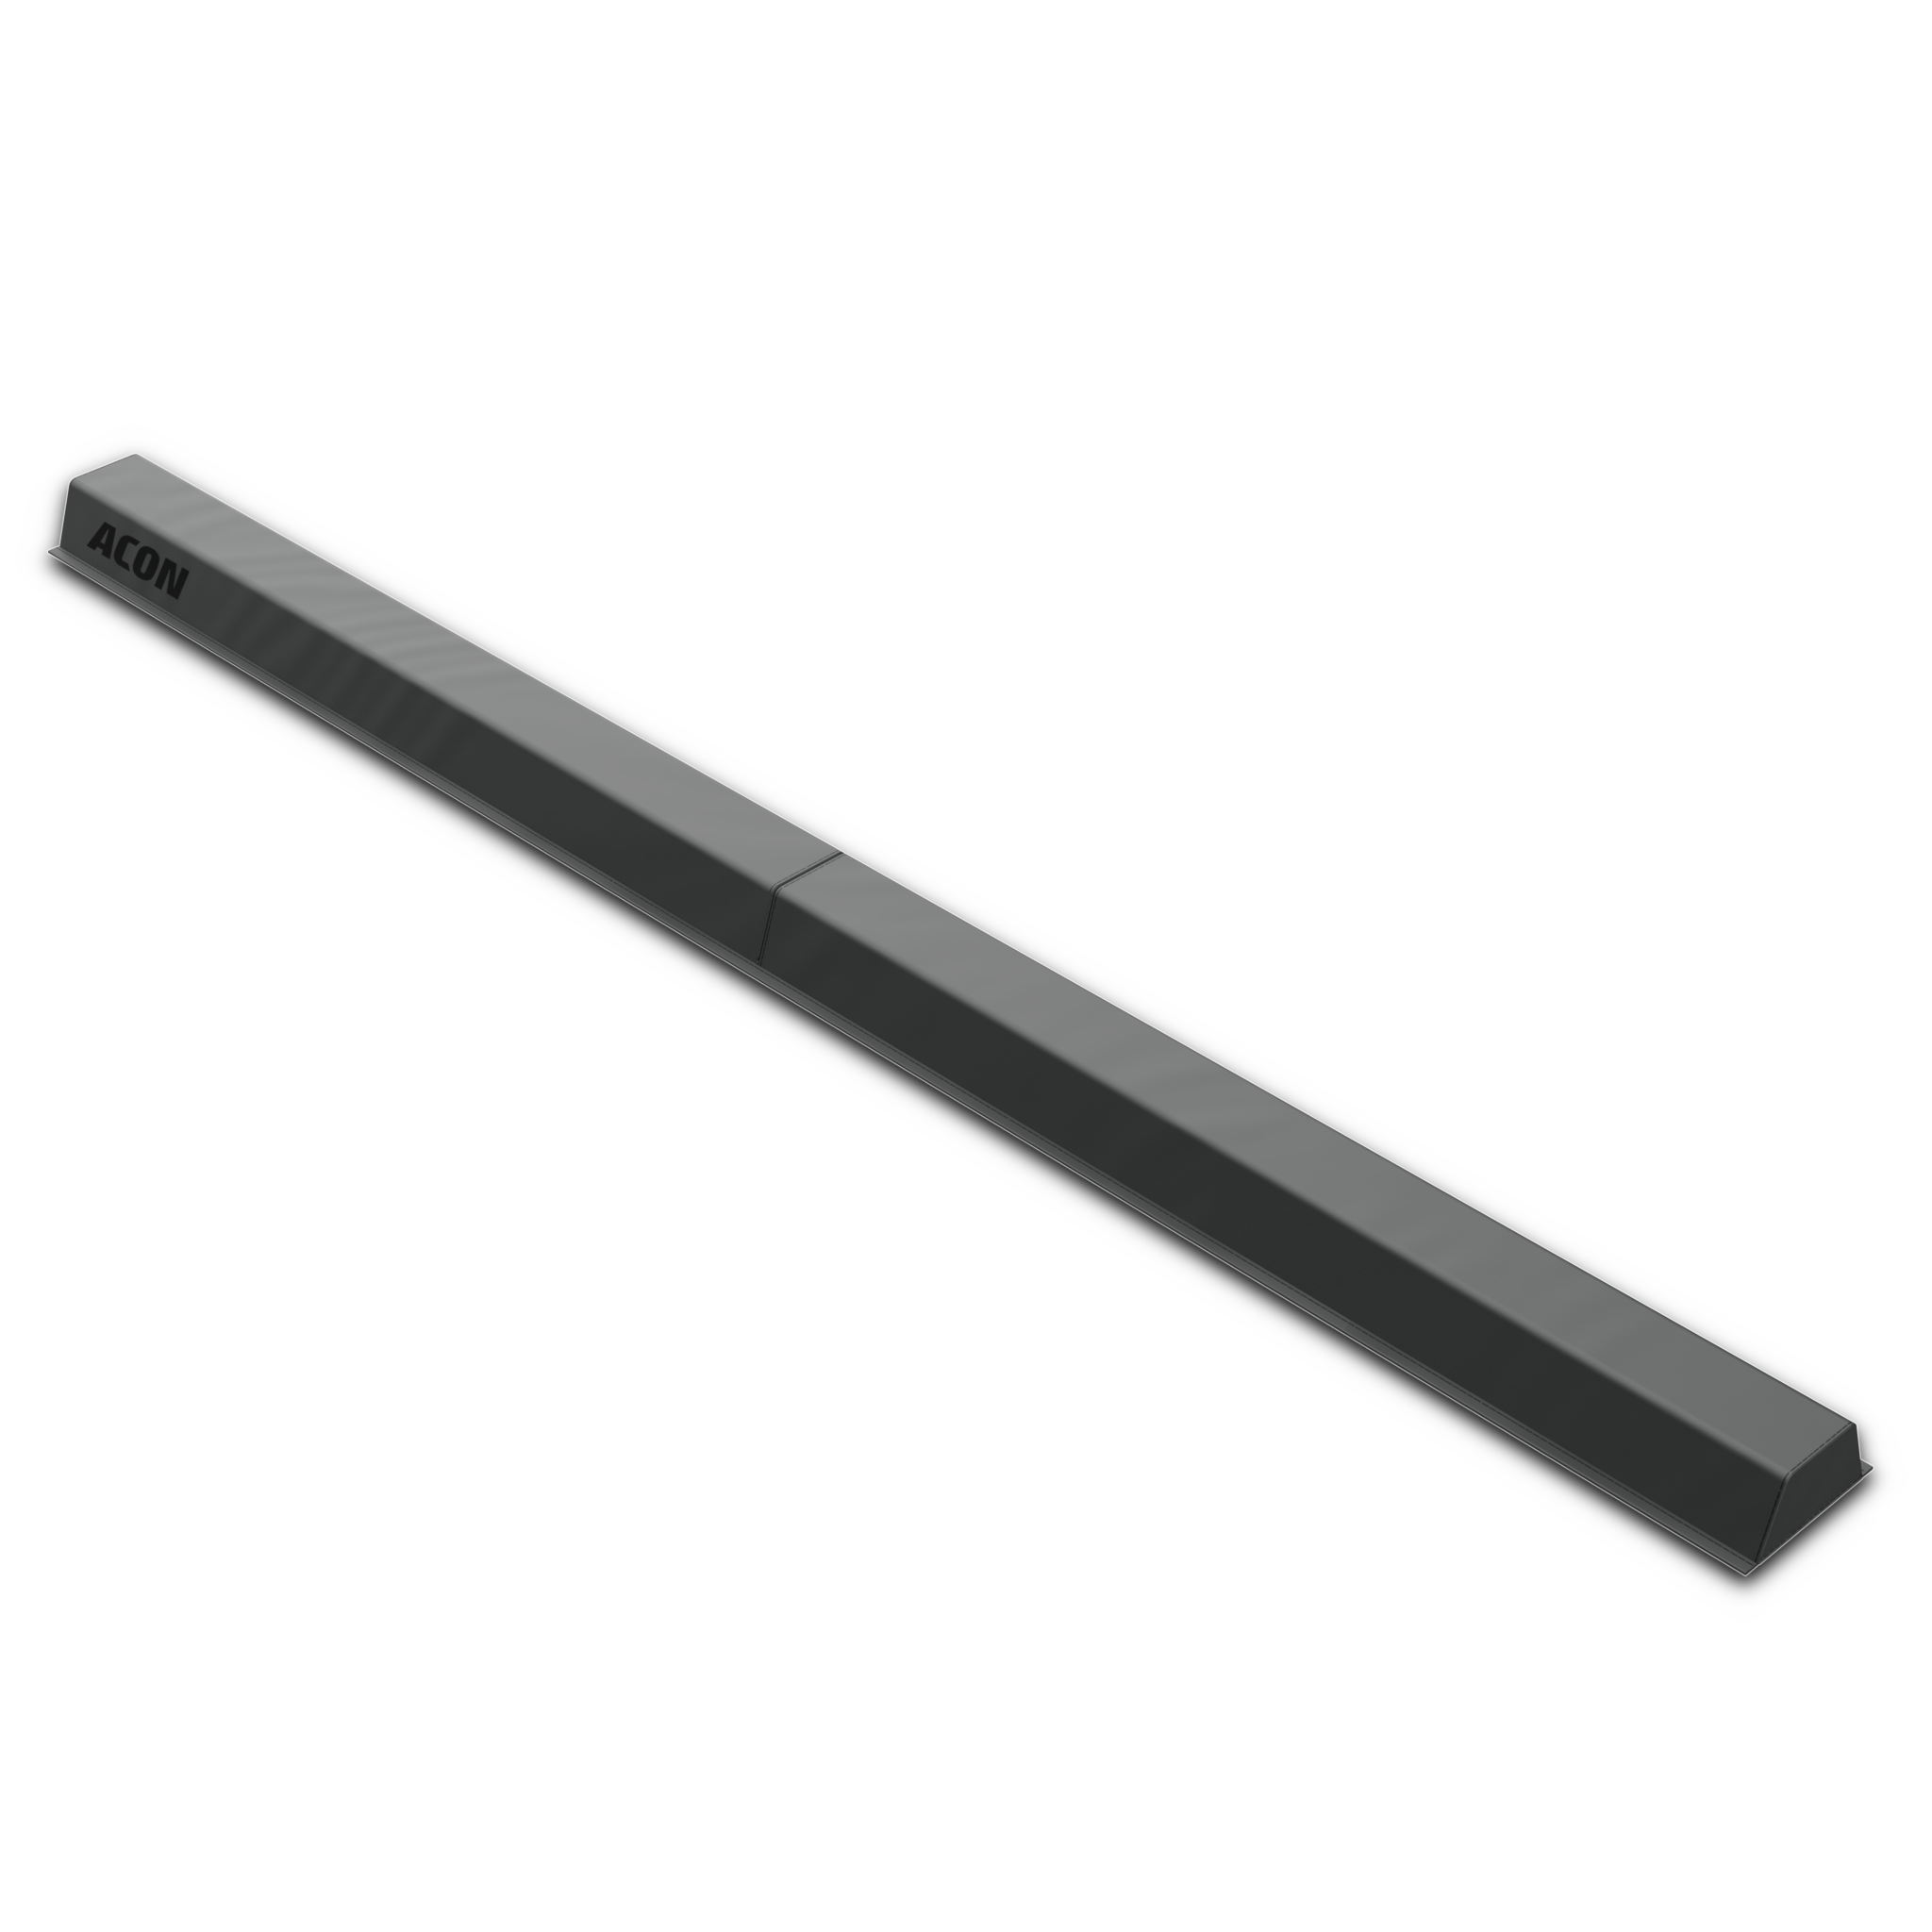 A Black Edition Acon Balance Beam product image against a white background